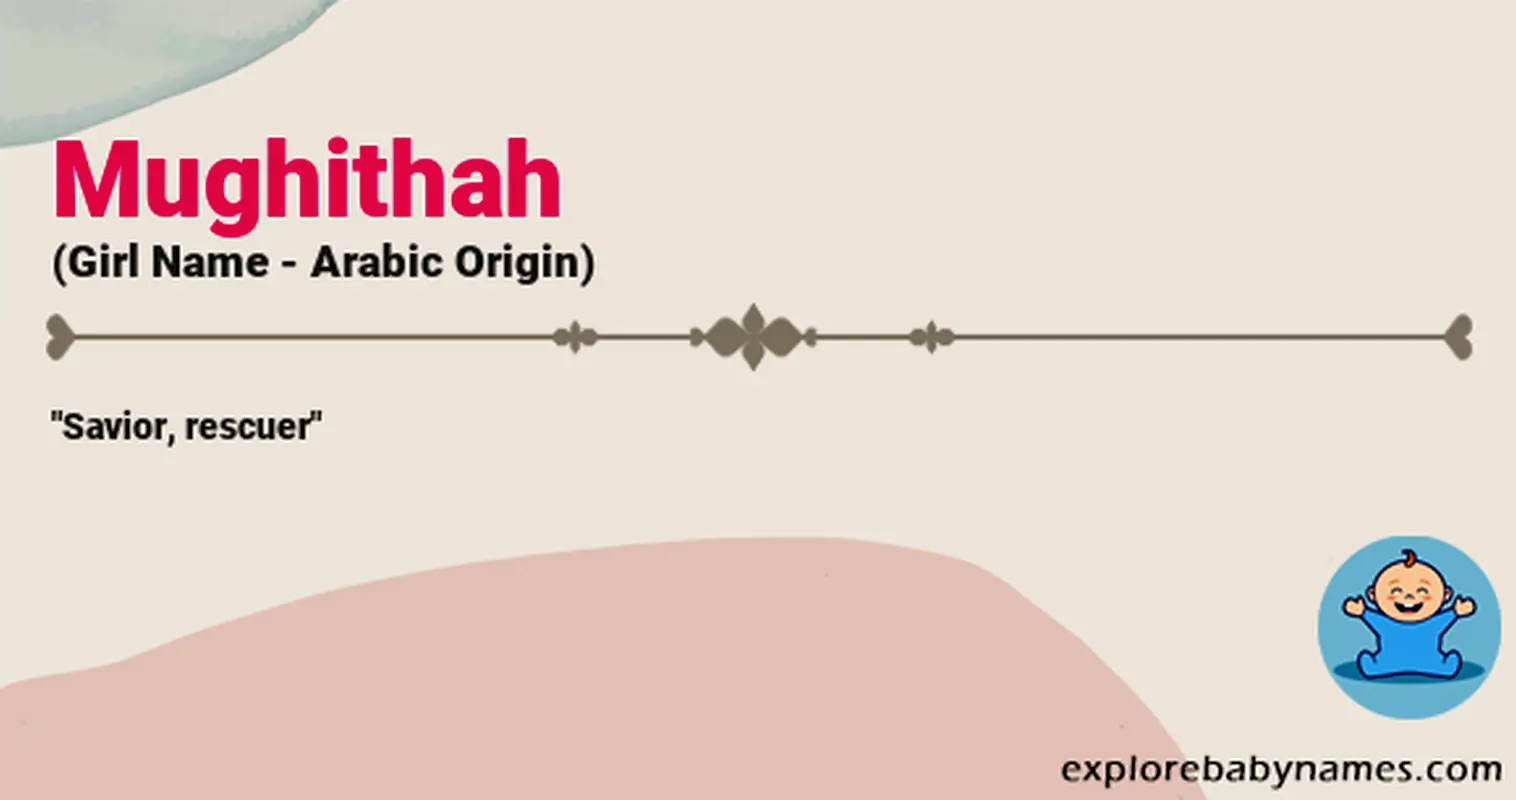 Meaning of Mughithah